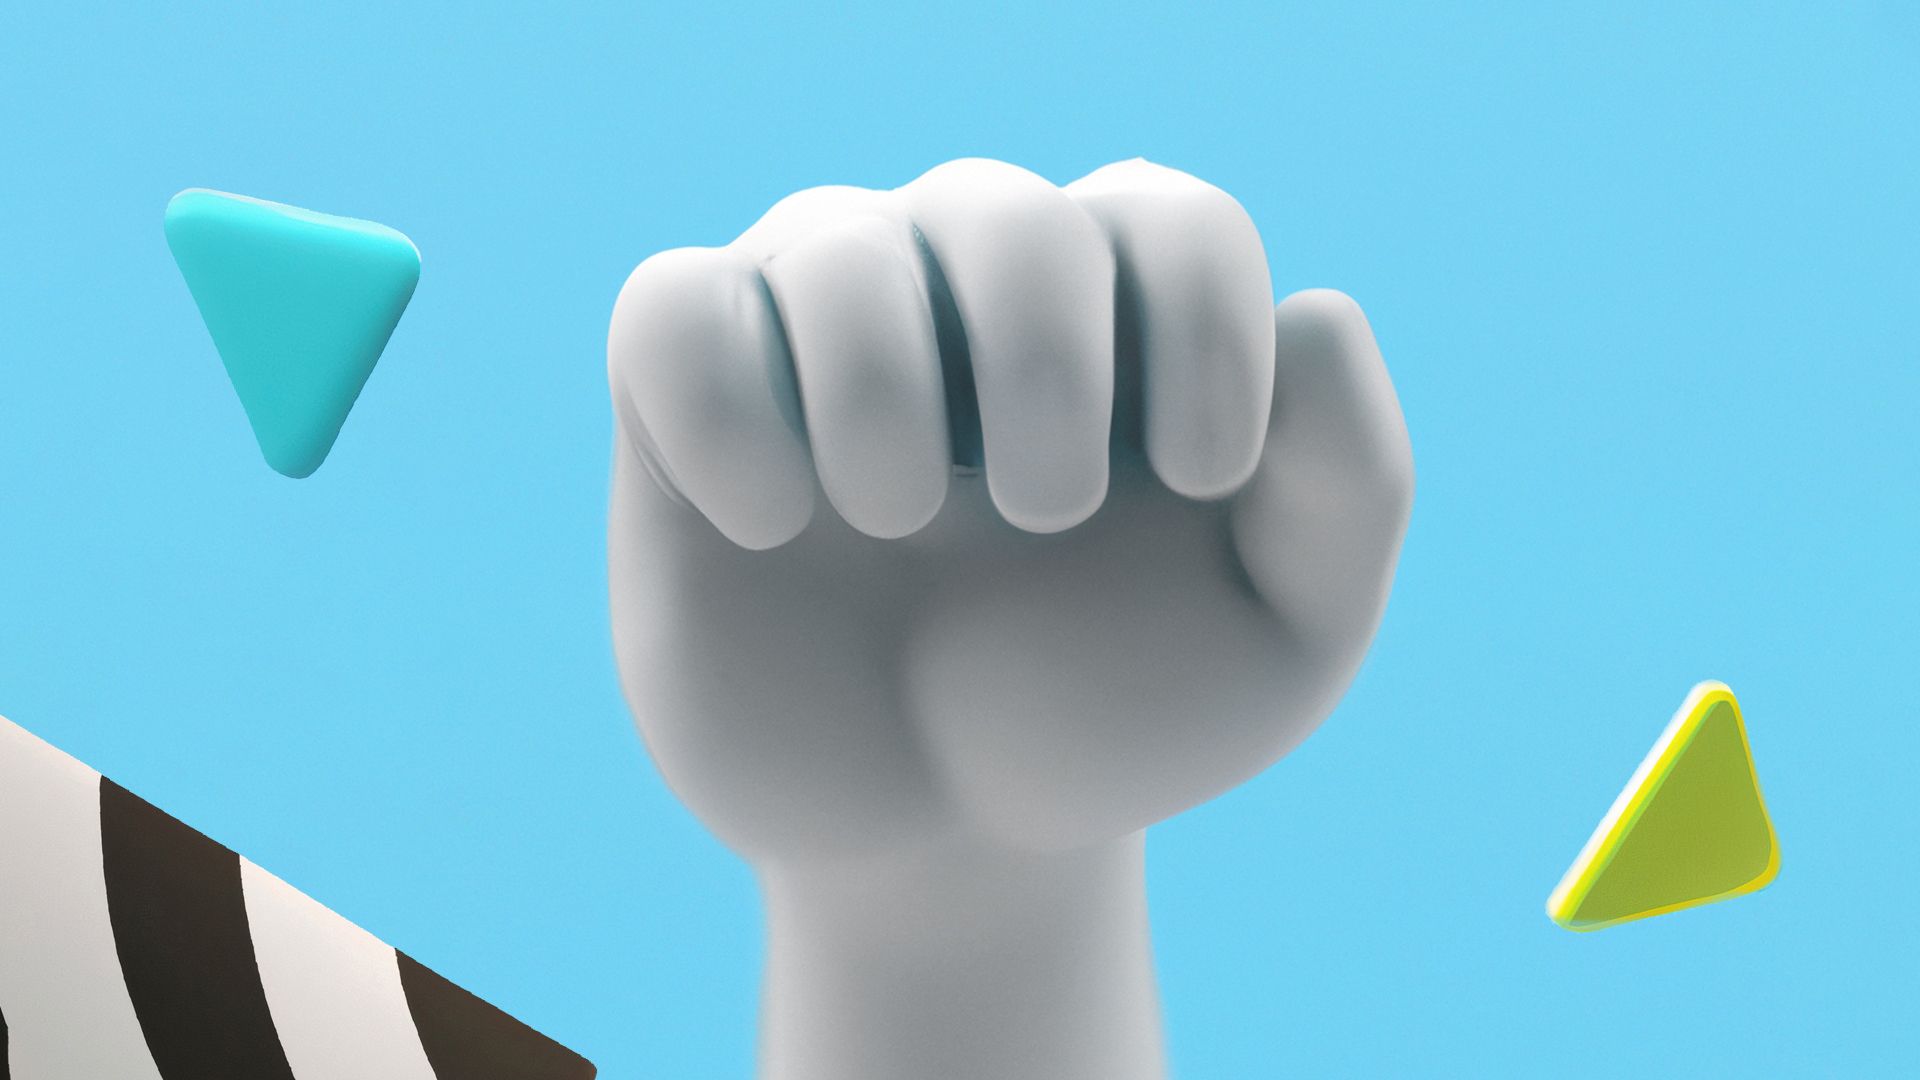 3d render of a white hand clenched in a light blue environment